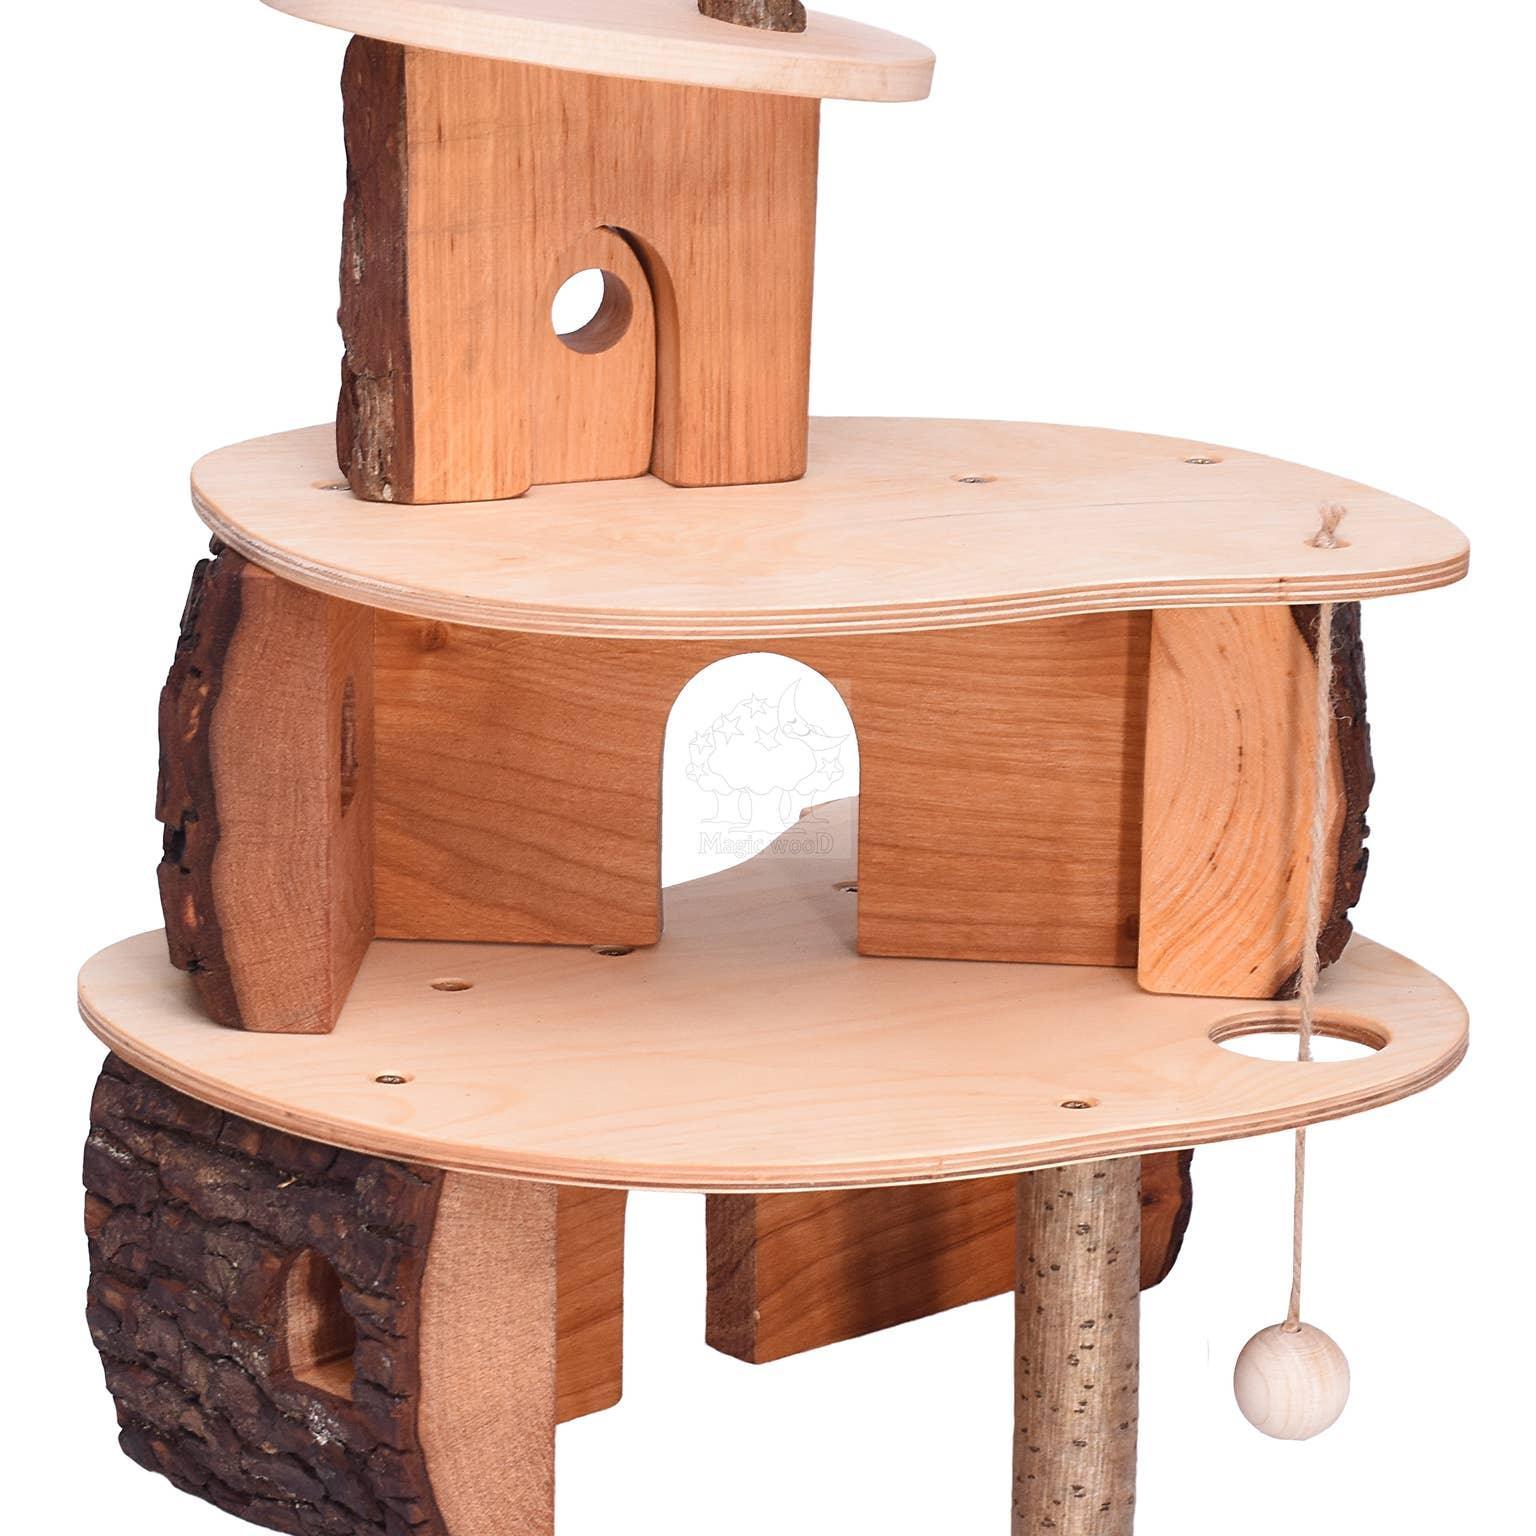 Magic Wood - Small Trunk Treehouse - Why and Whale